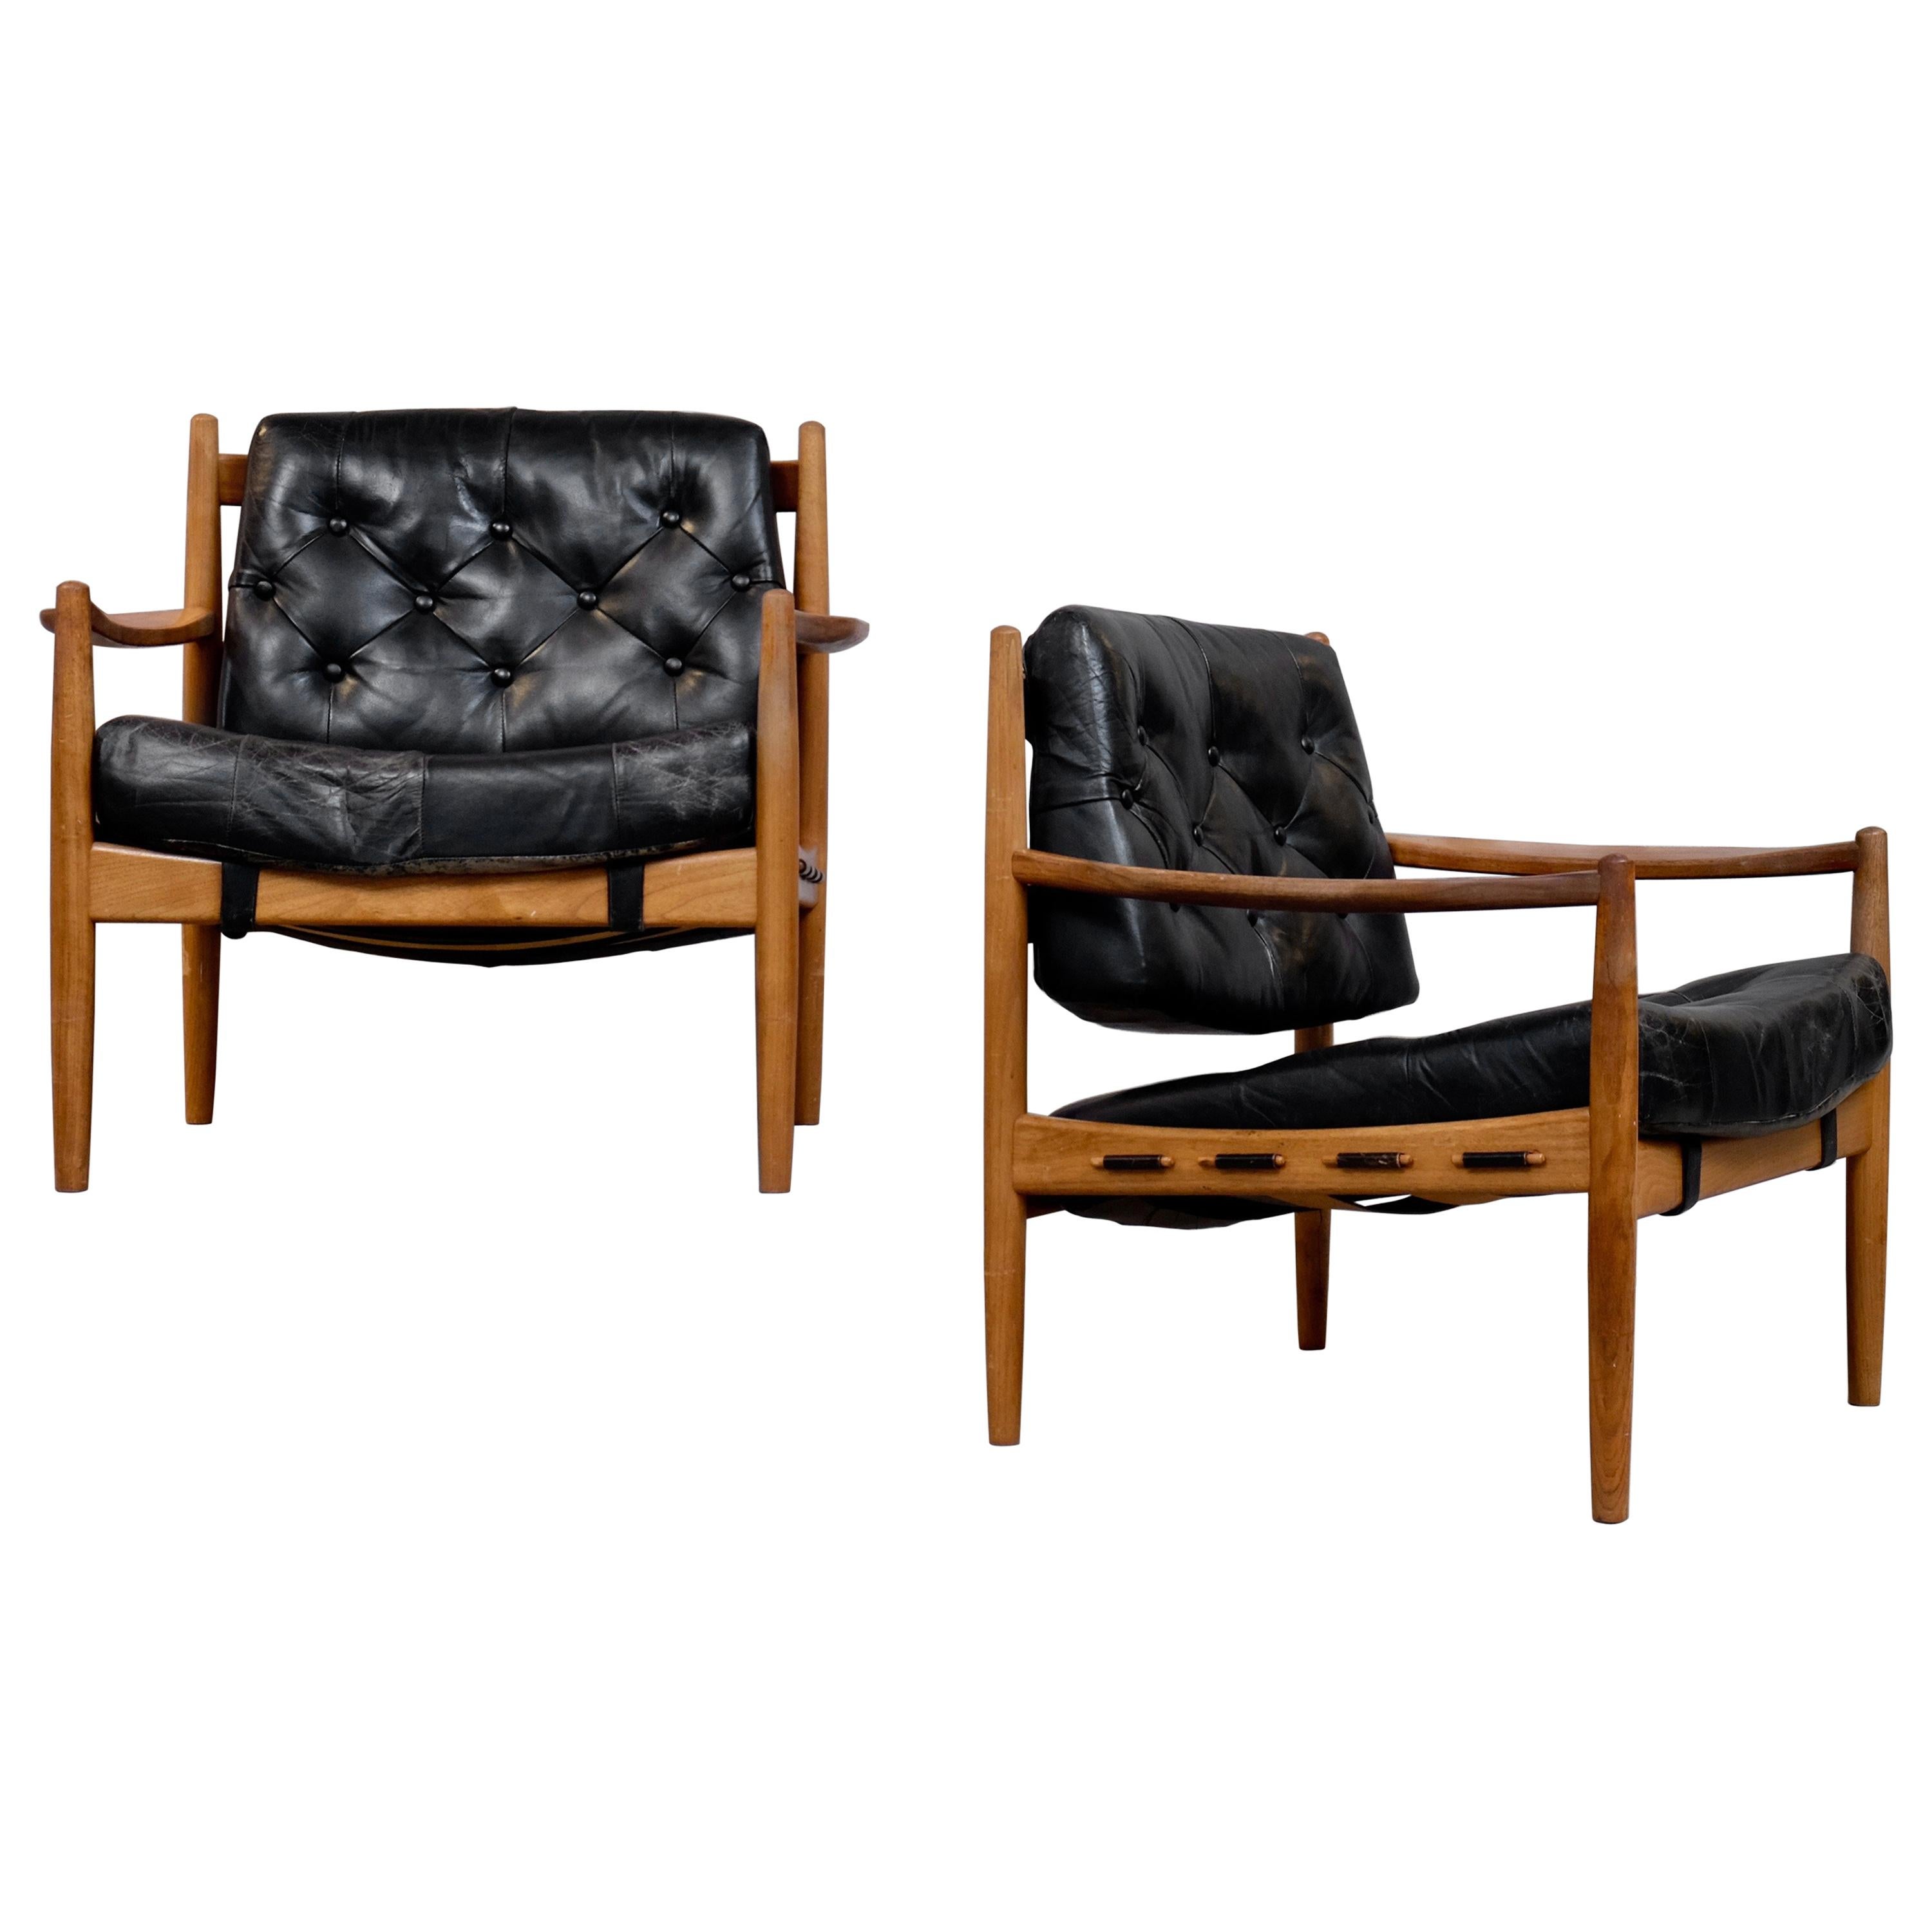 Pair of Black Leather "Läckö" Easy Chairs by Ingemar Thillmark, 1960s